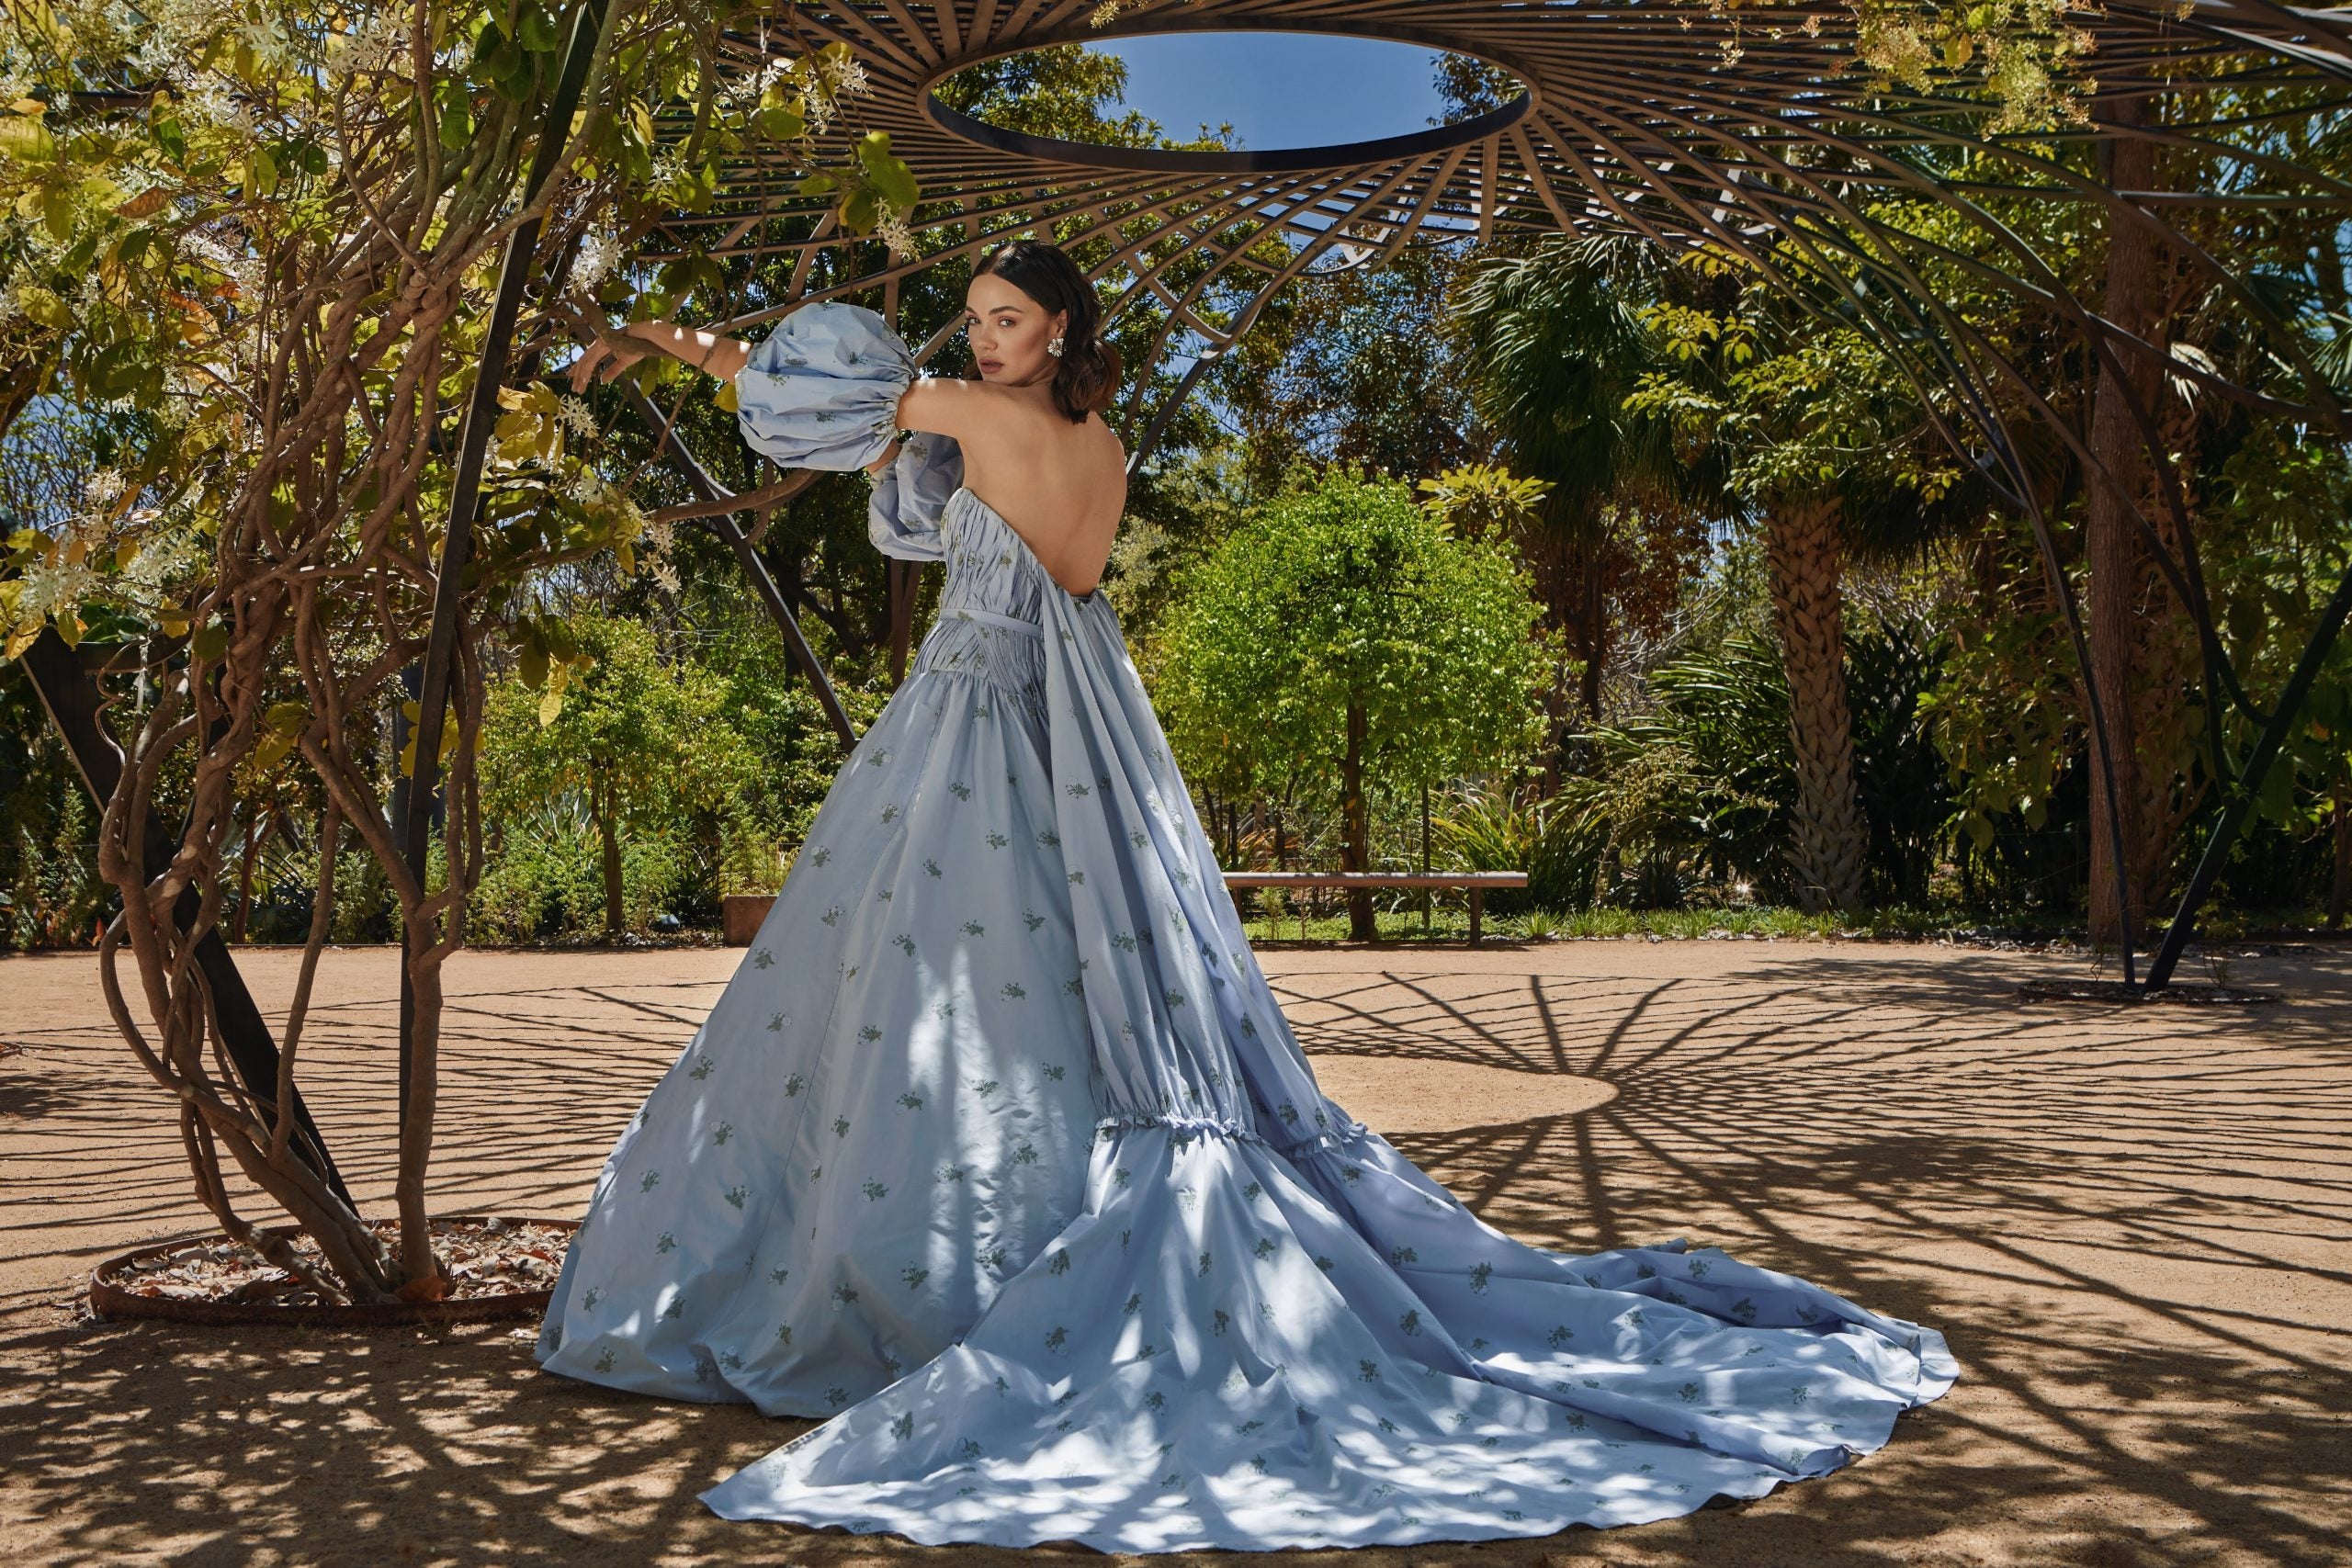 Sky Blue Beaded Ball Gown Pastel Blue Quinceanera Dresses With Flowers  Applique, Sweetheart Neckline, Sequined Prom Grips, Tulle Sweep Train, And  Sweet 15 Masquerade Dress From Weddingteam, $176.66 | DHgate.Com